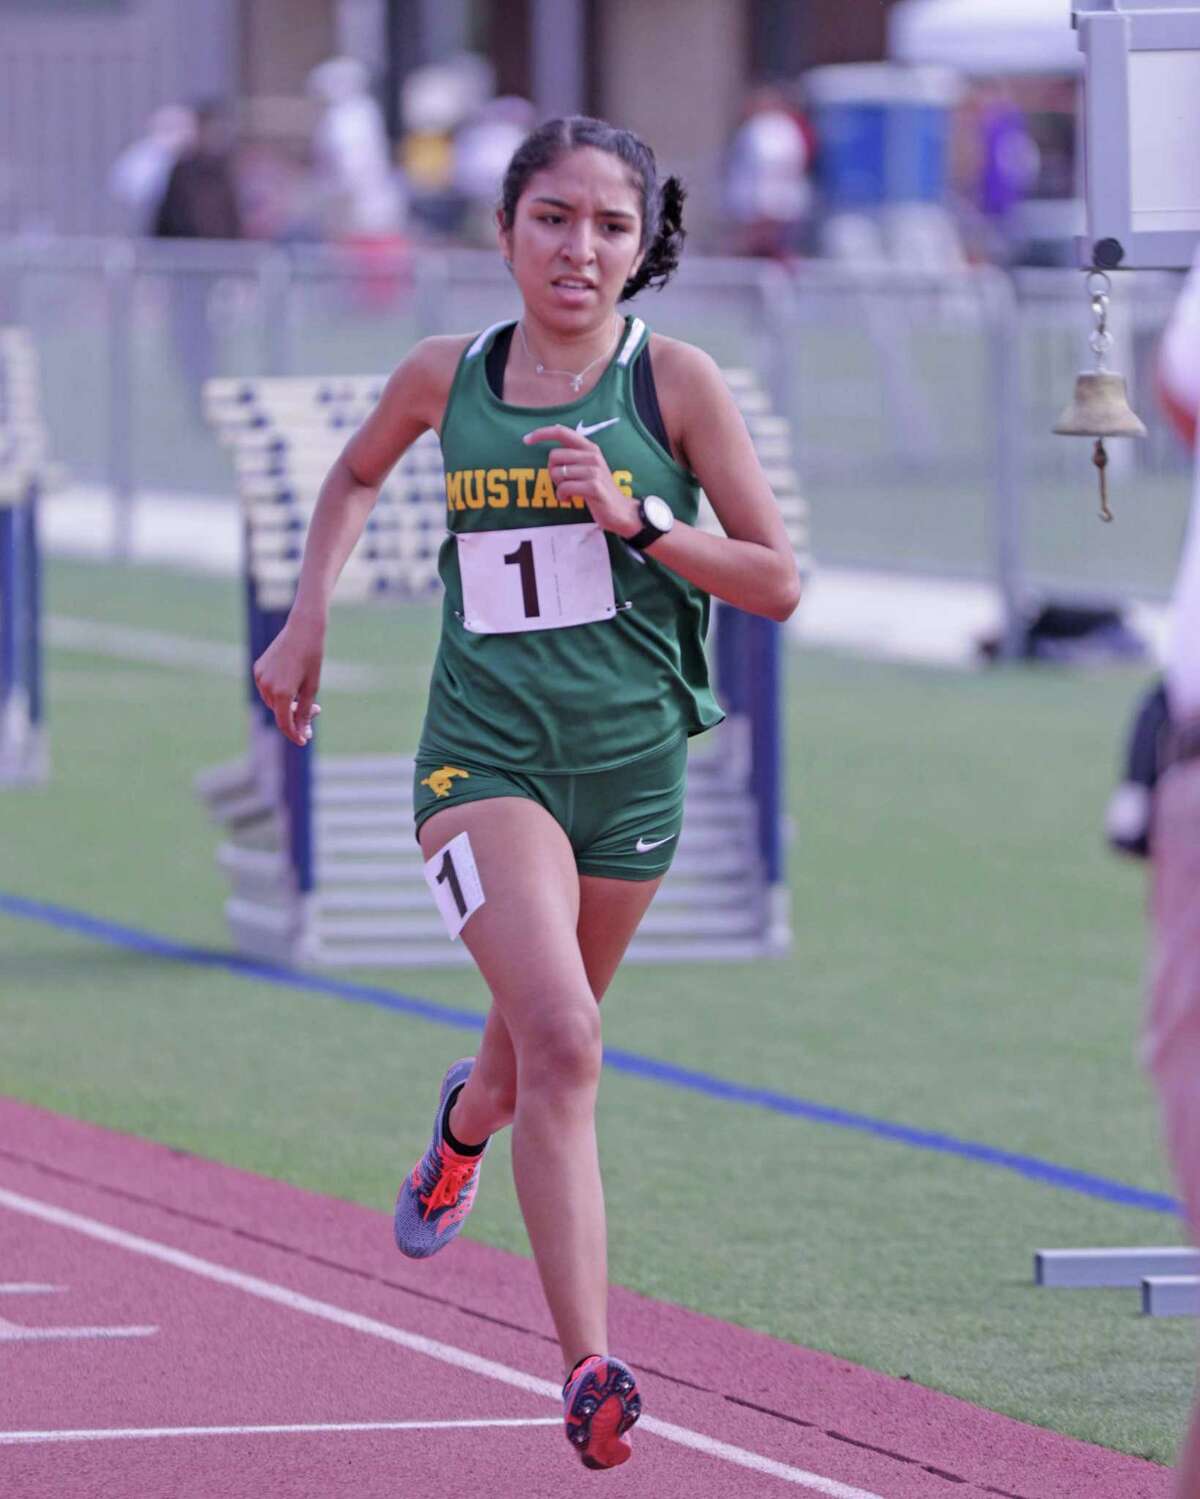 Nixon’s Alexa Rodriguez won the regional title in the 3,200 meter run and placed second in the 1,600 meter run to qualify for the state meet in both events.